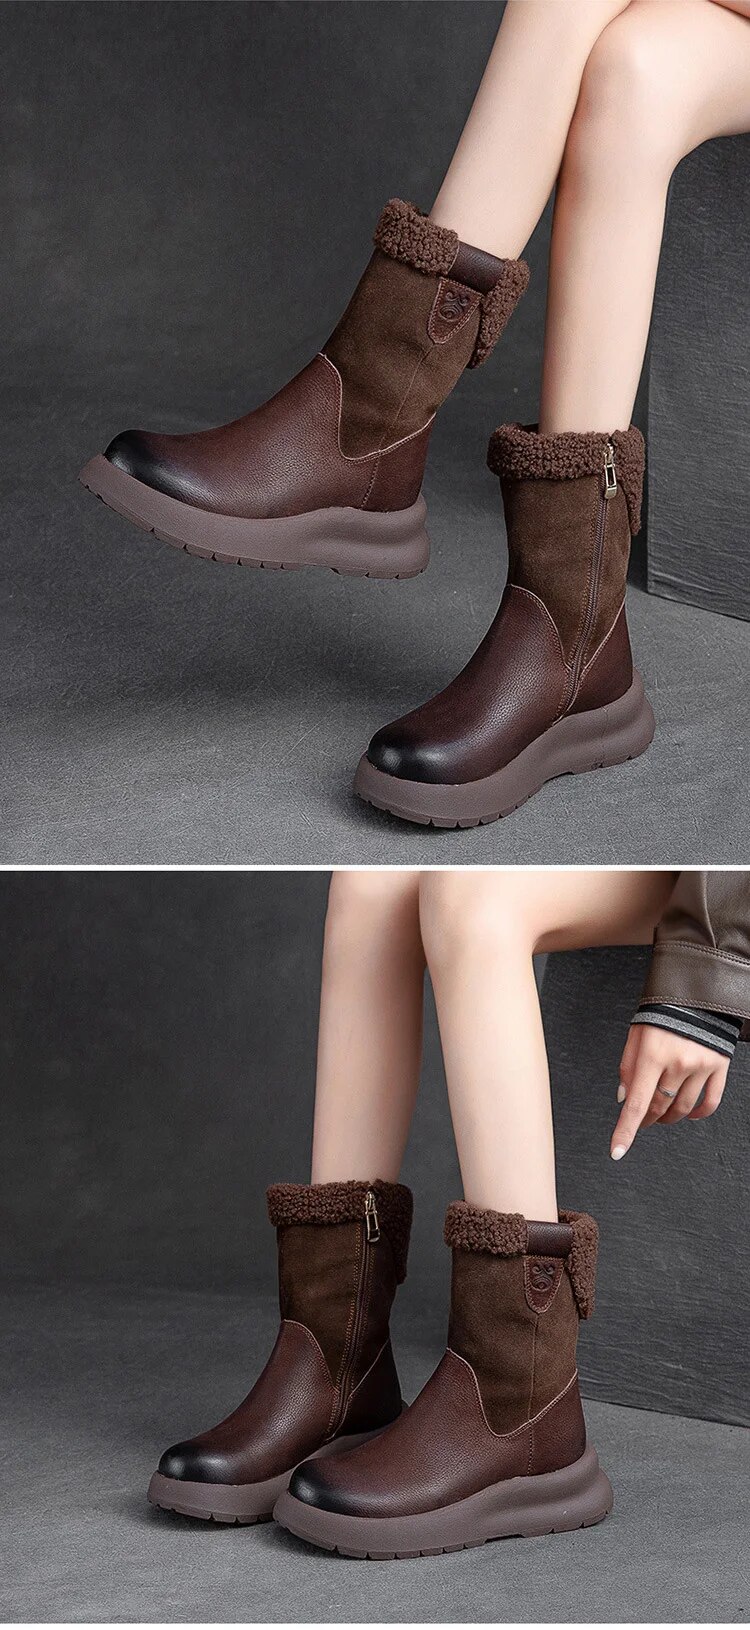 come4buy.com-Flat Ankle Boots Women